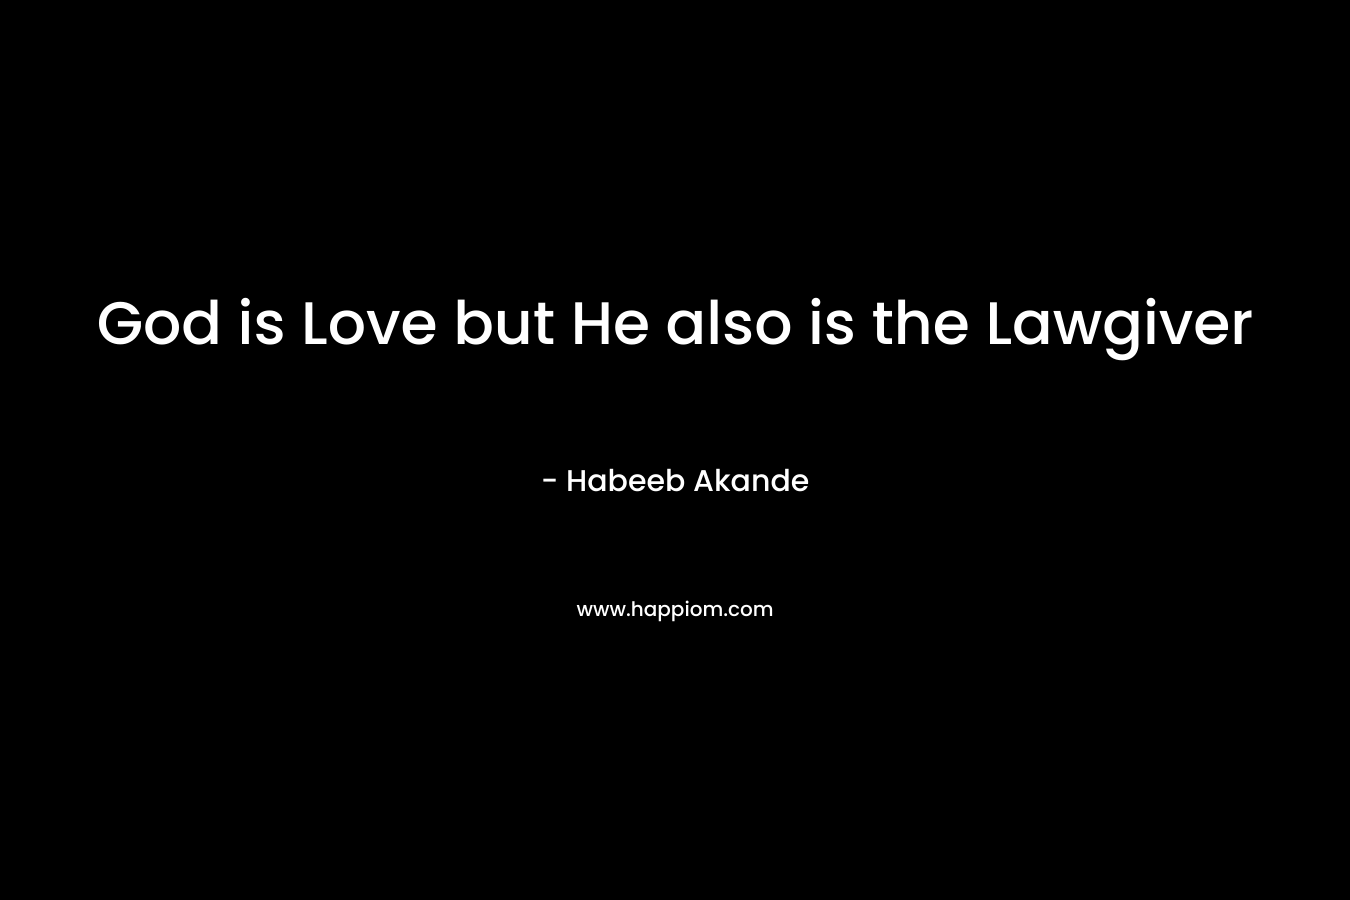 God is Love but He also is the Lawgiver